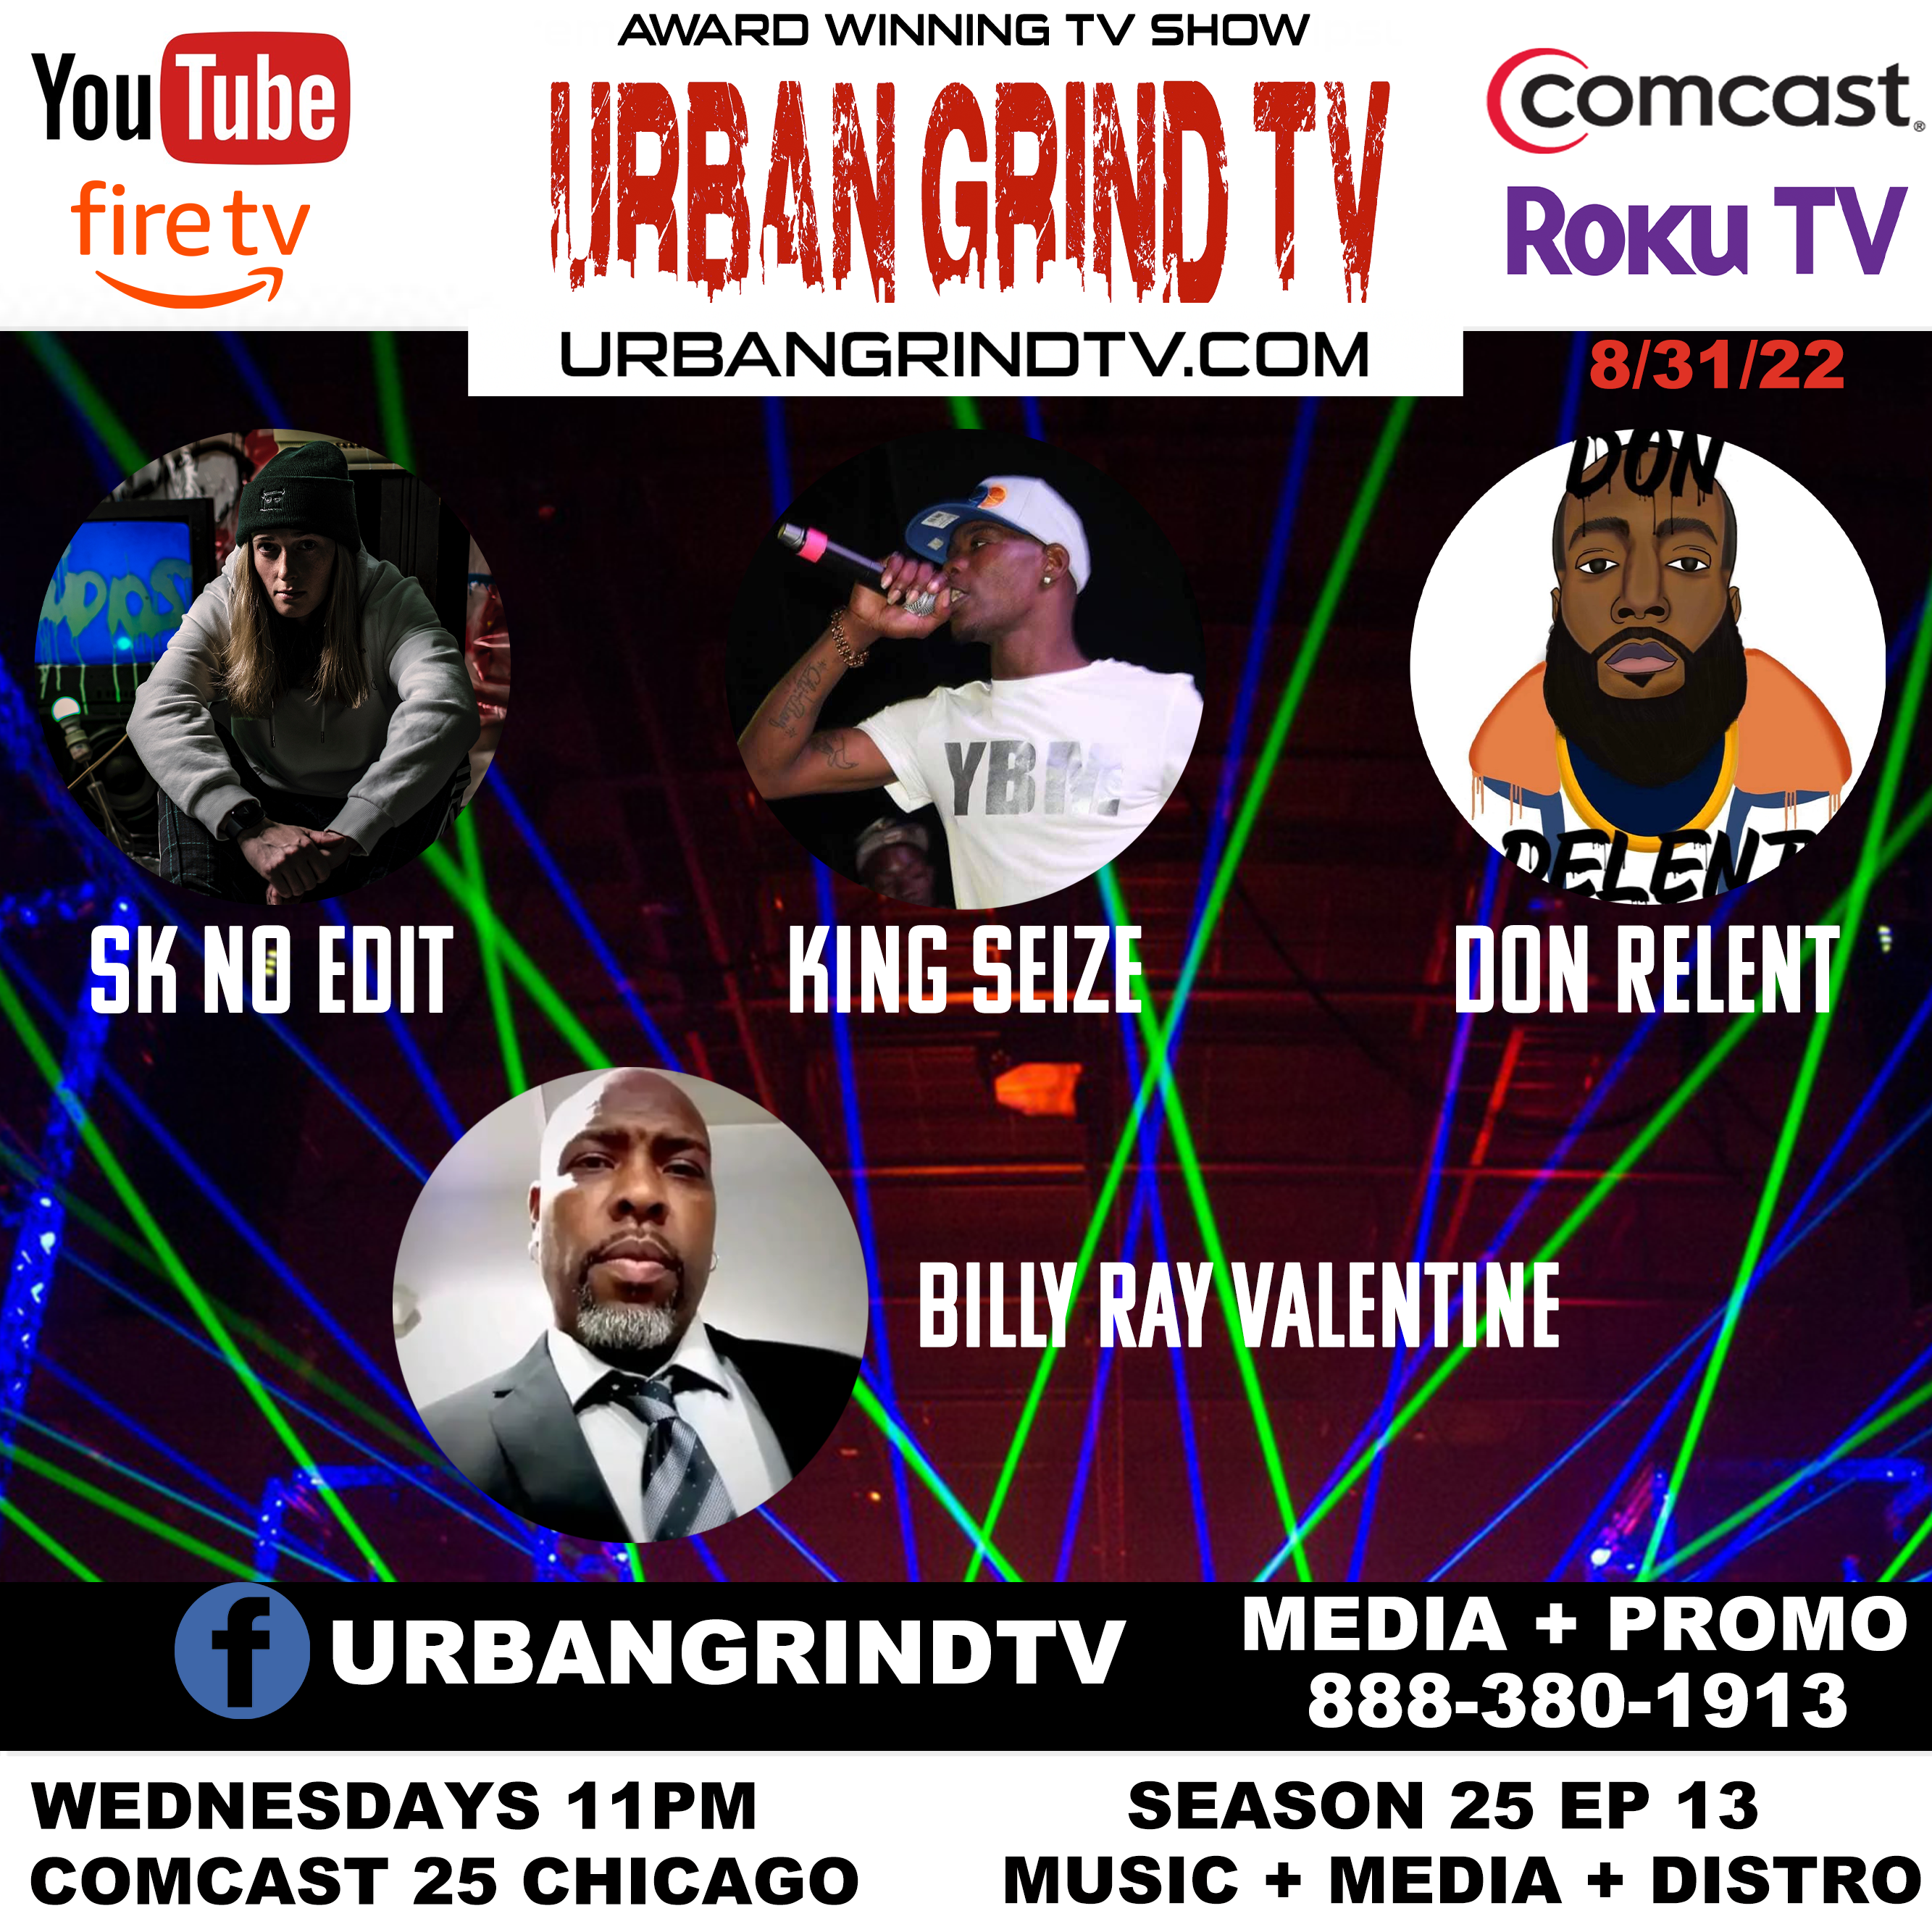 Coming Up on Urban Grind TV Show SK No Edit, King Seize, Don Relent and Billy Ray Valentine Wednesday August 31, 2022